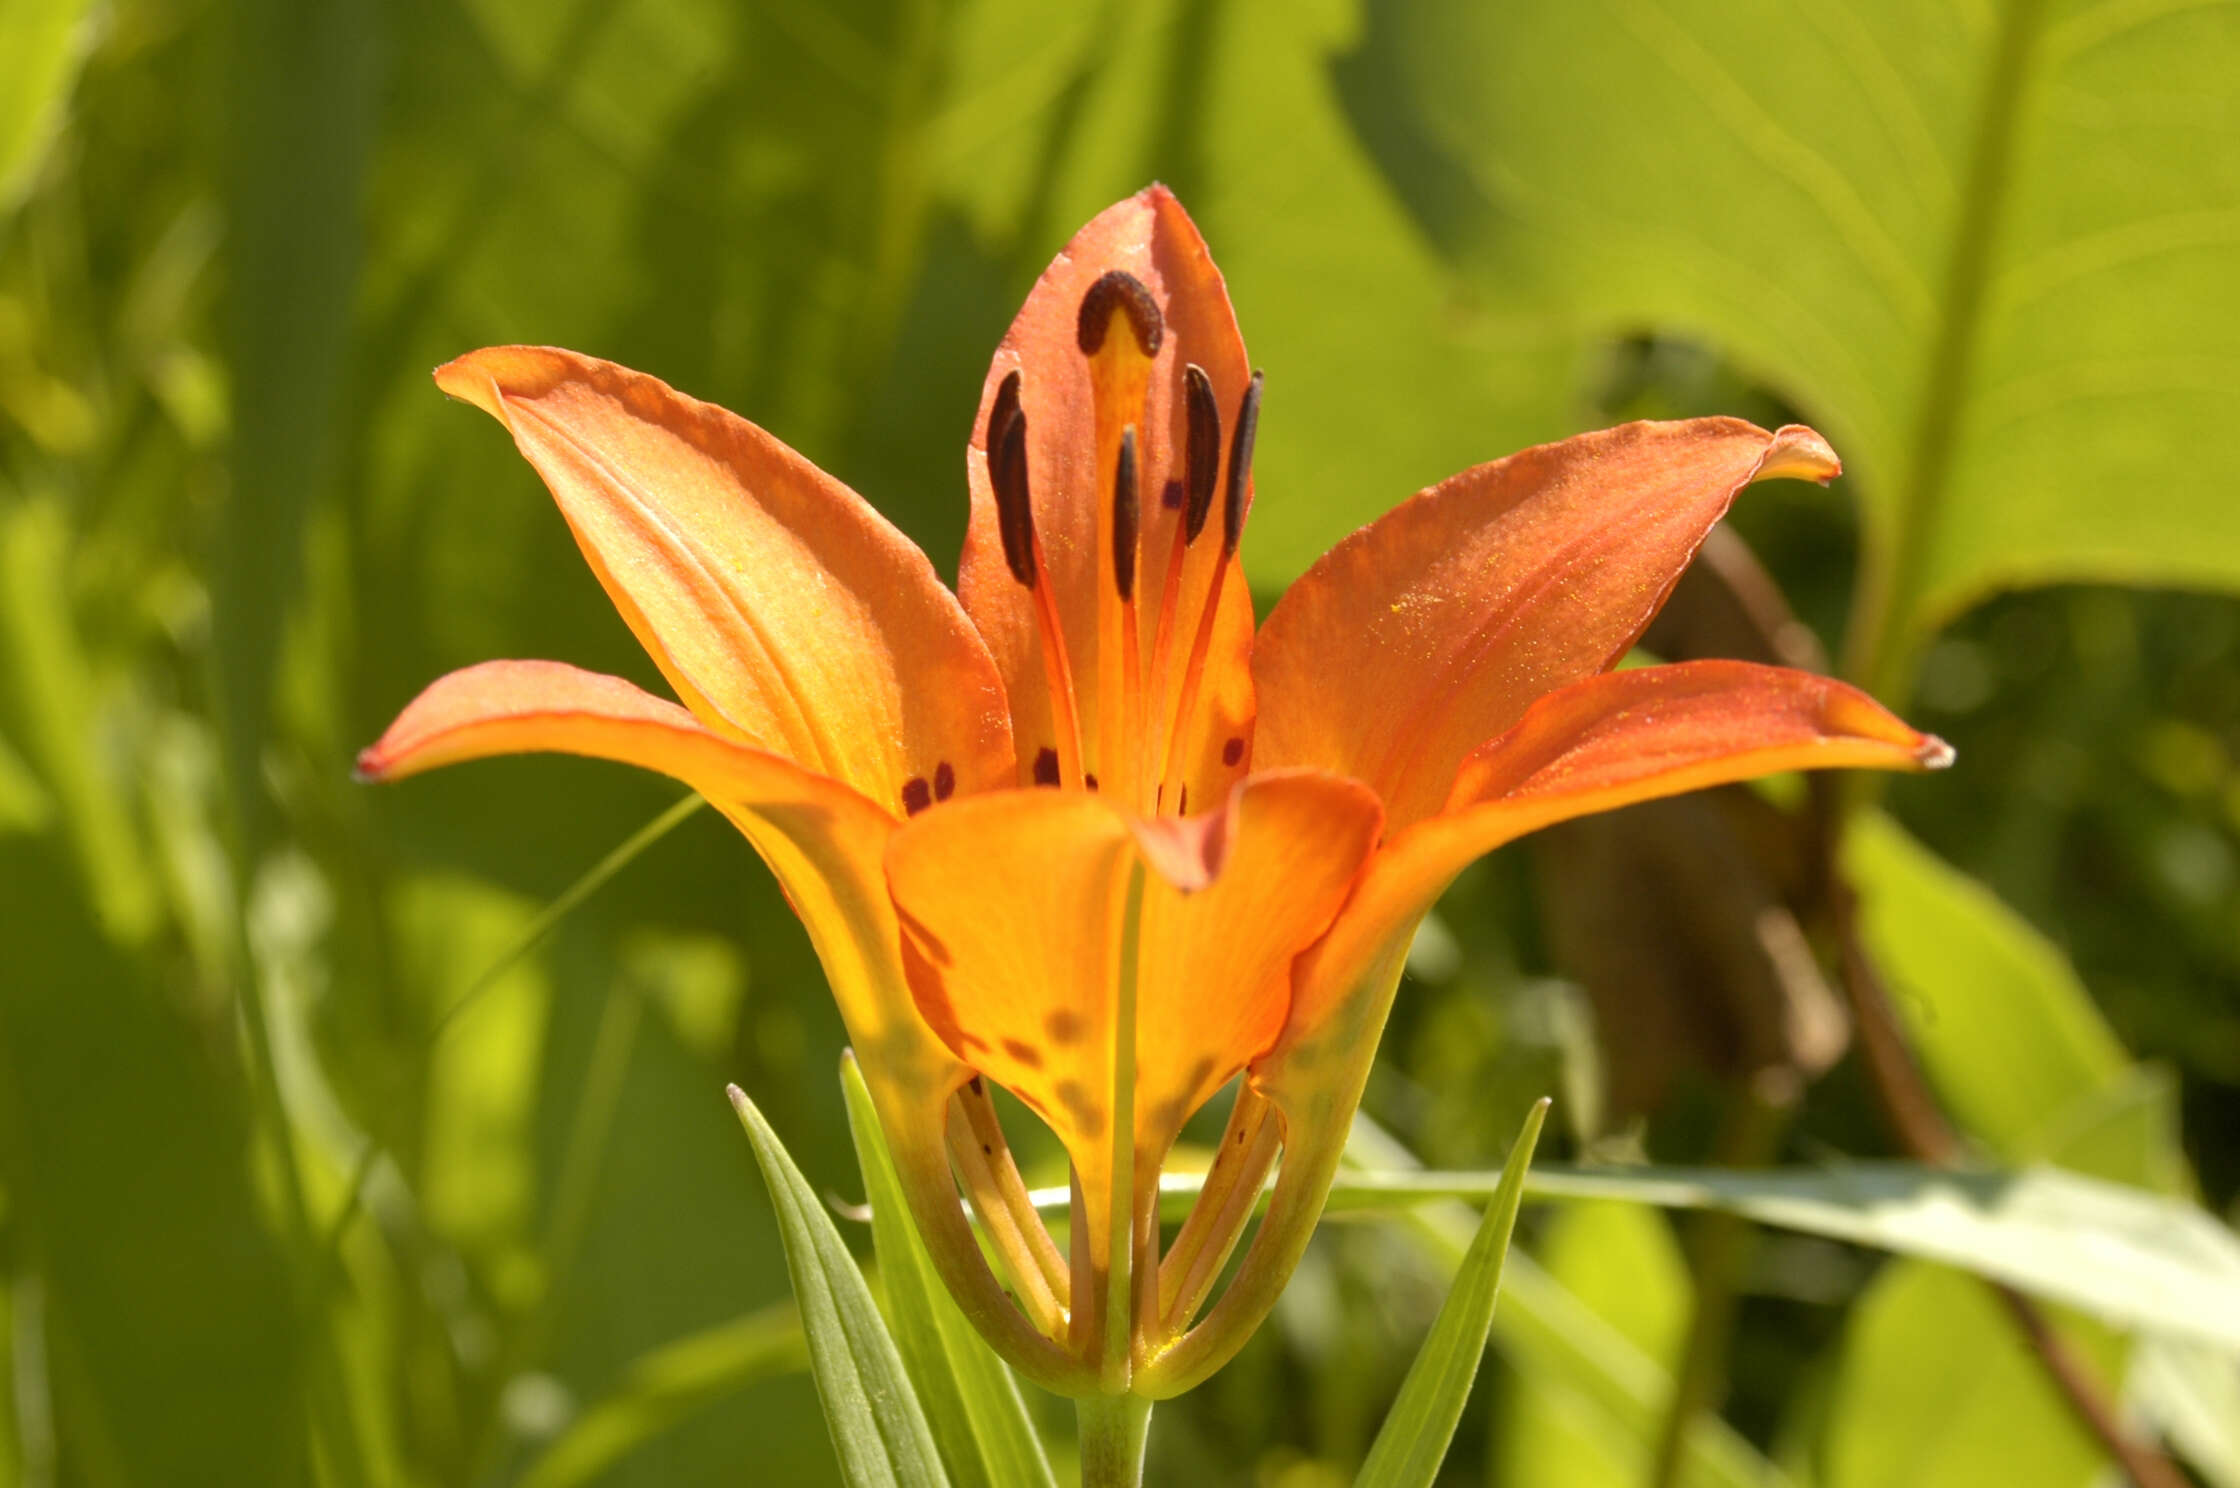 Image of wood lily